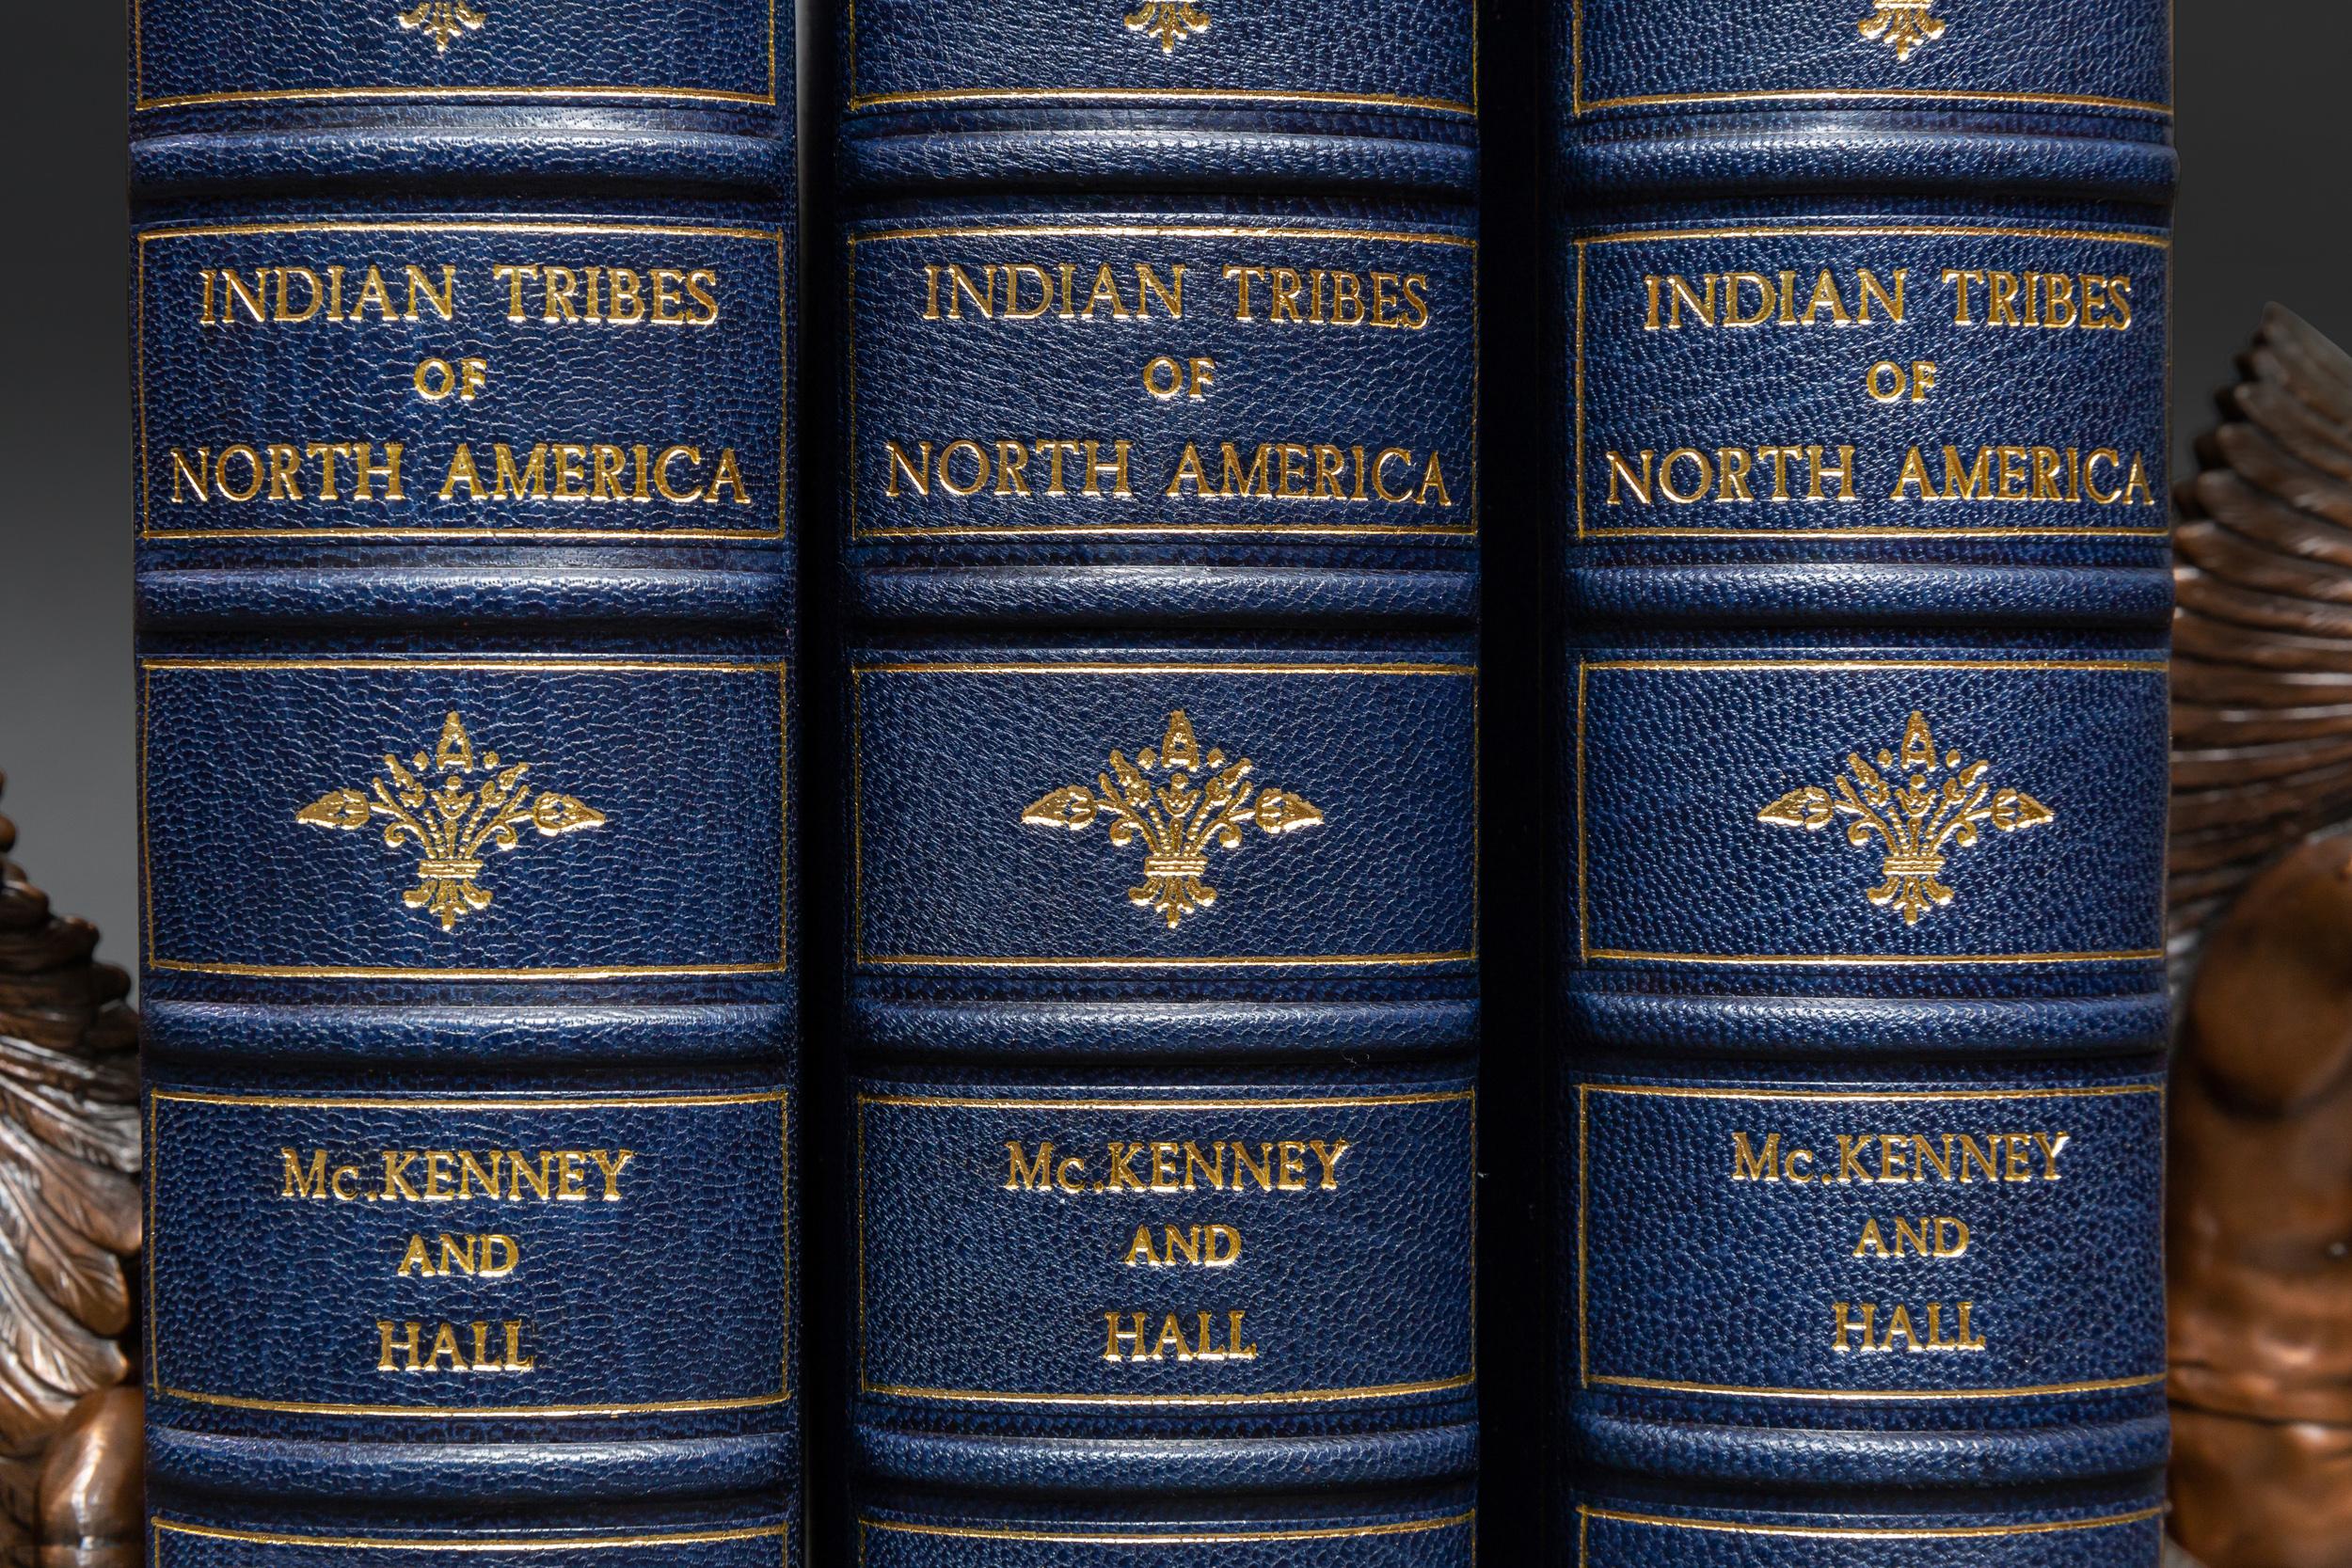 20th Century 3 Volumes. Thomas L. McKenney & James Hall, The Indian Tribes of North America